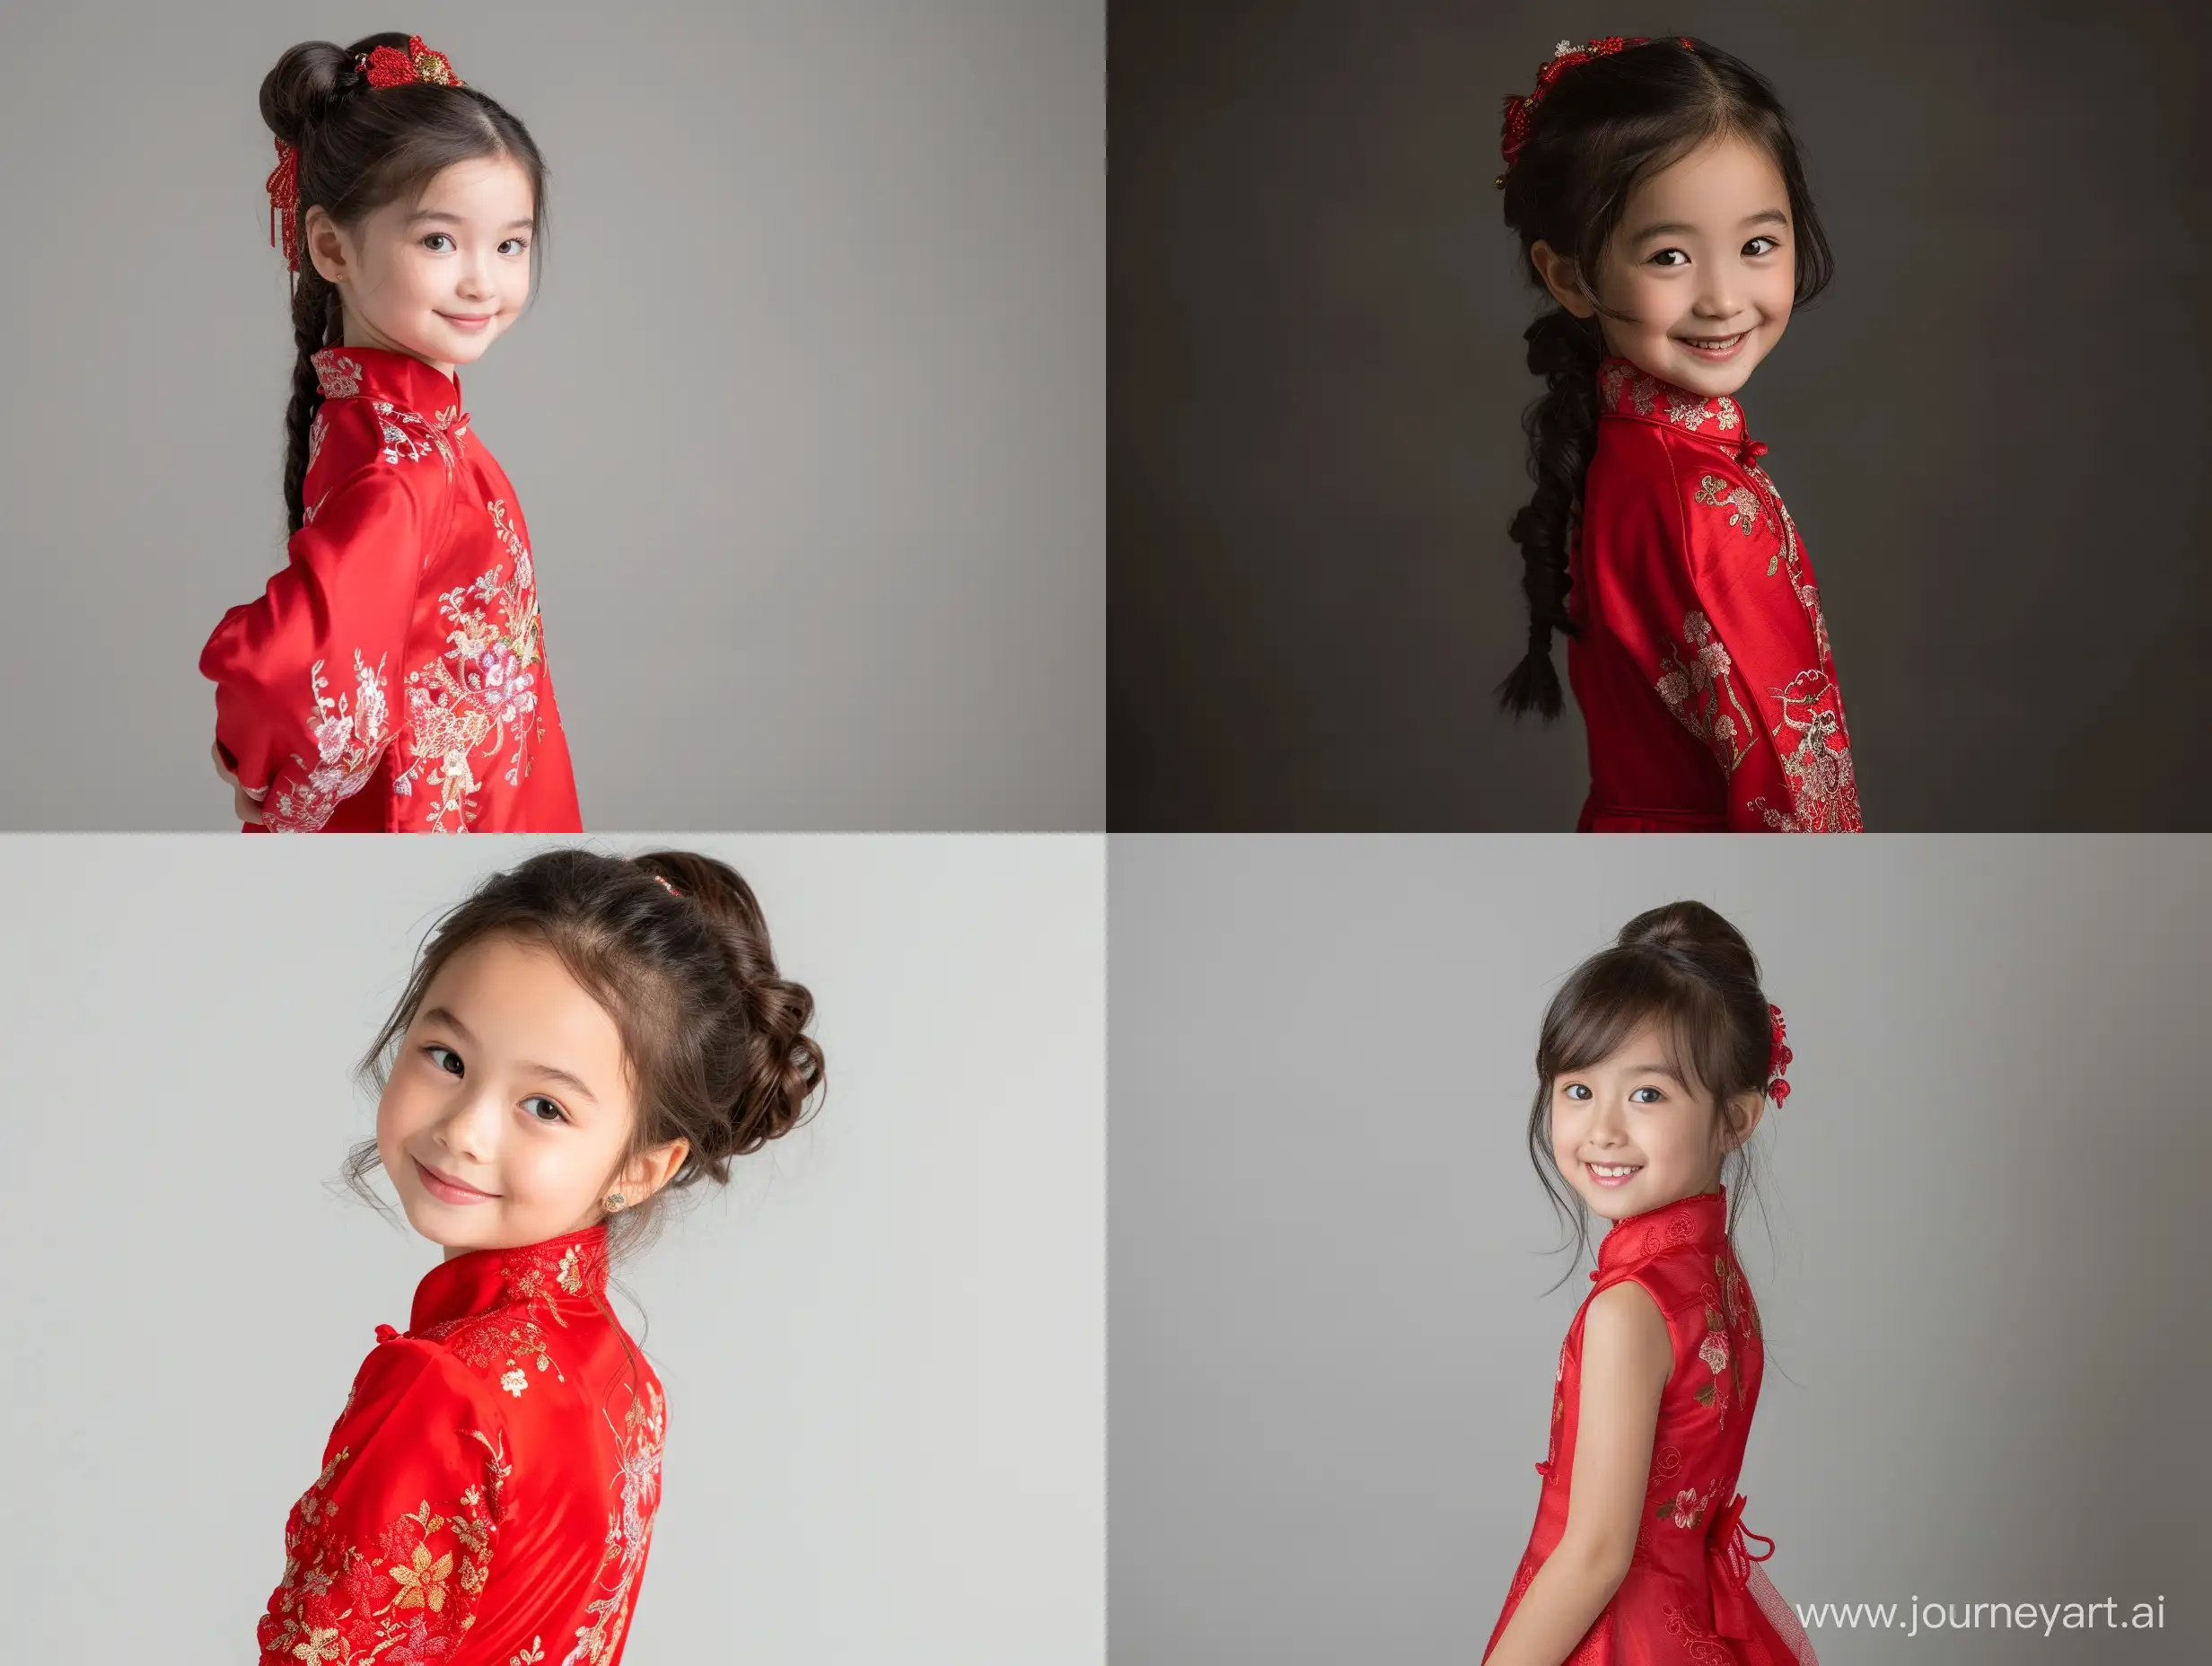 A full-length view of a young girl in a red QiPao casting a smiling glance over her shoulder.